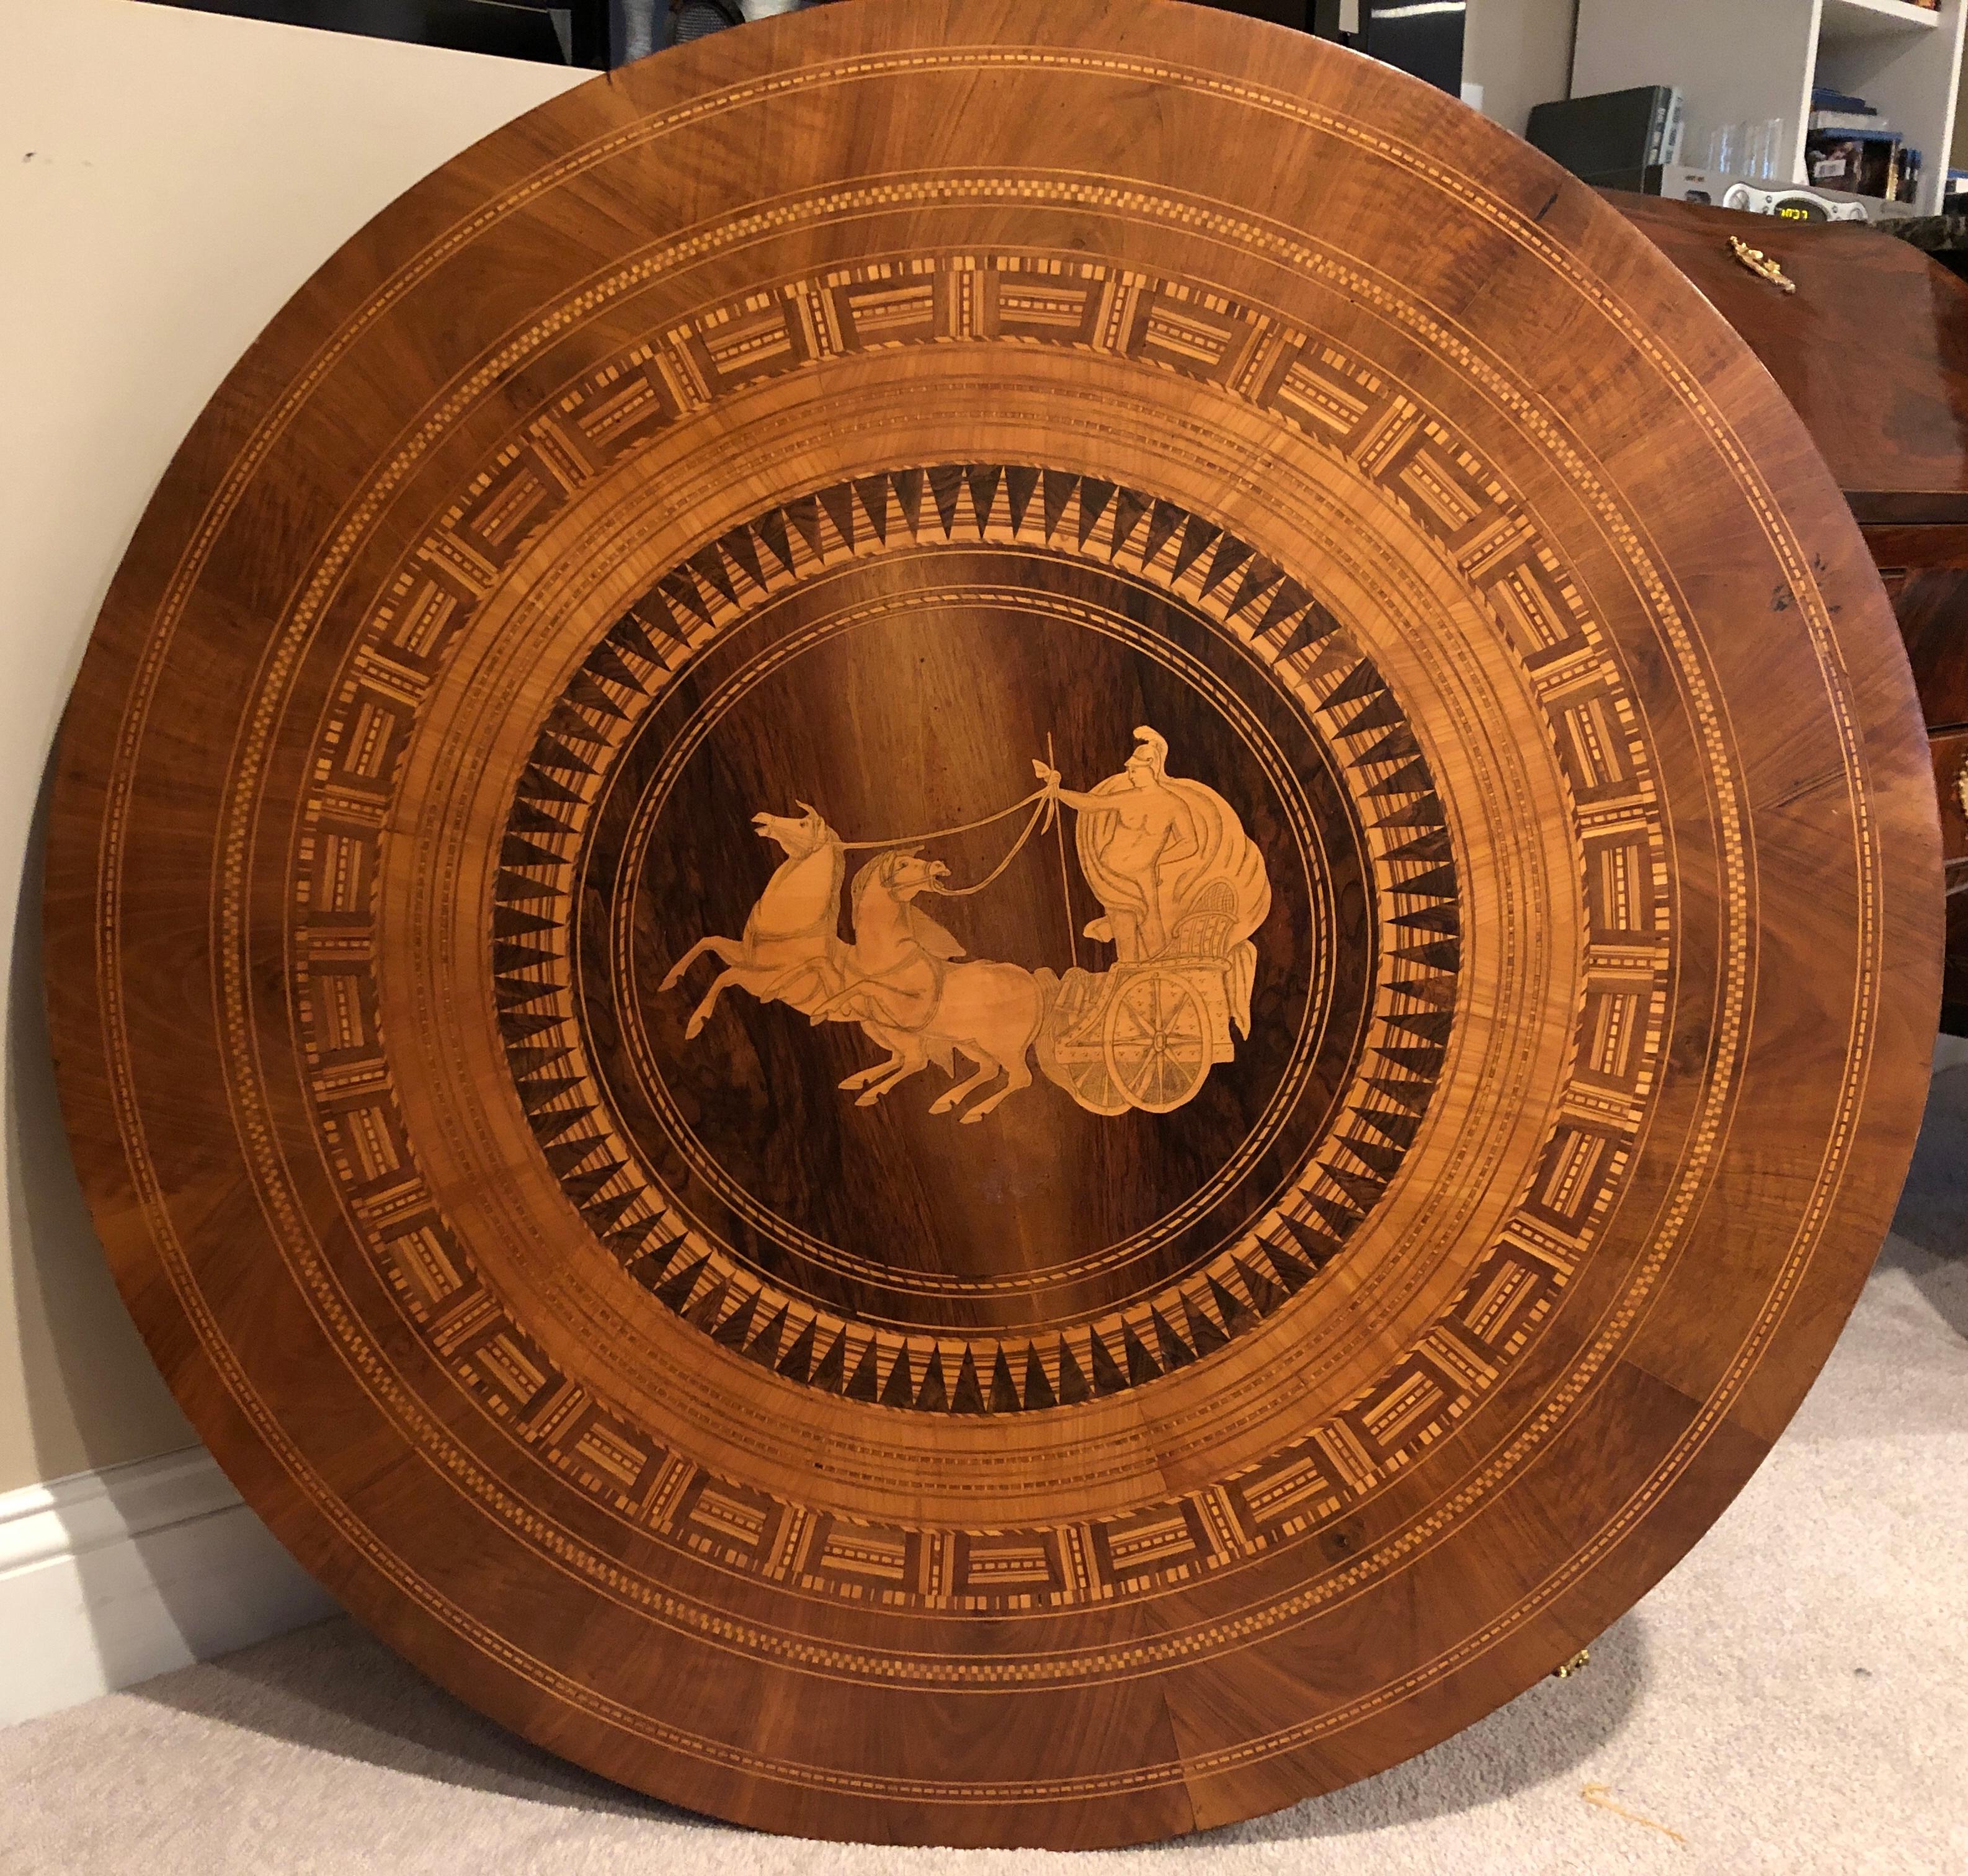 Beautiful center table, Italy 1860-1870, beautiful marquetry on top and base. In the central medaillon of the top the designer depicted a chariot. Exquisite craftsmanship. In good condition with original patina.